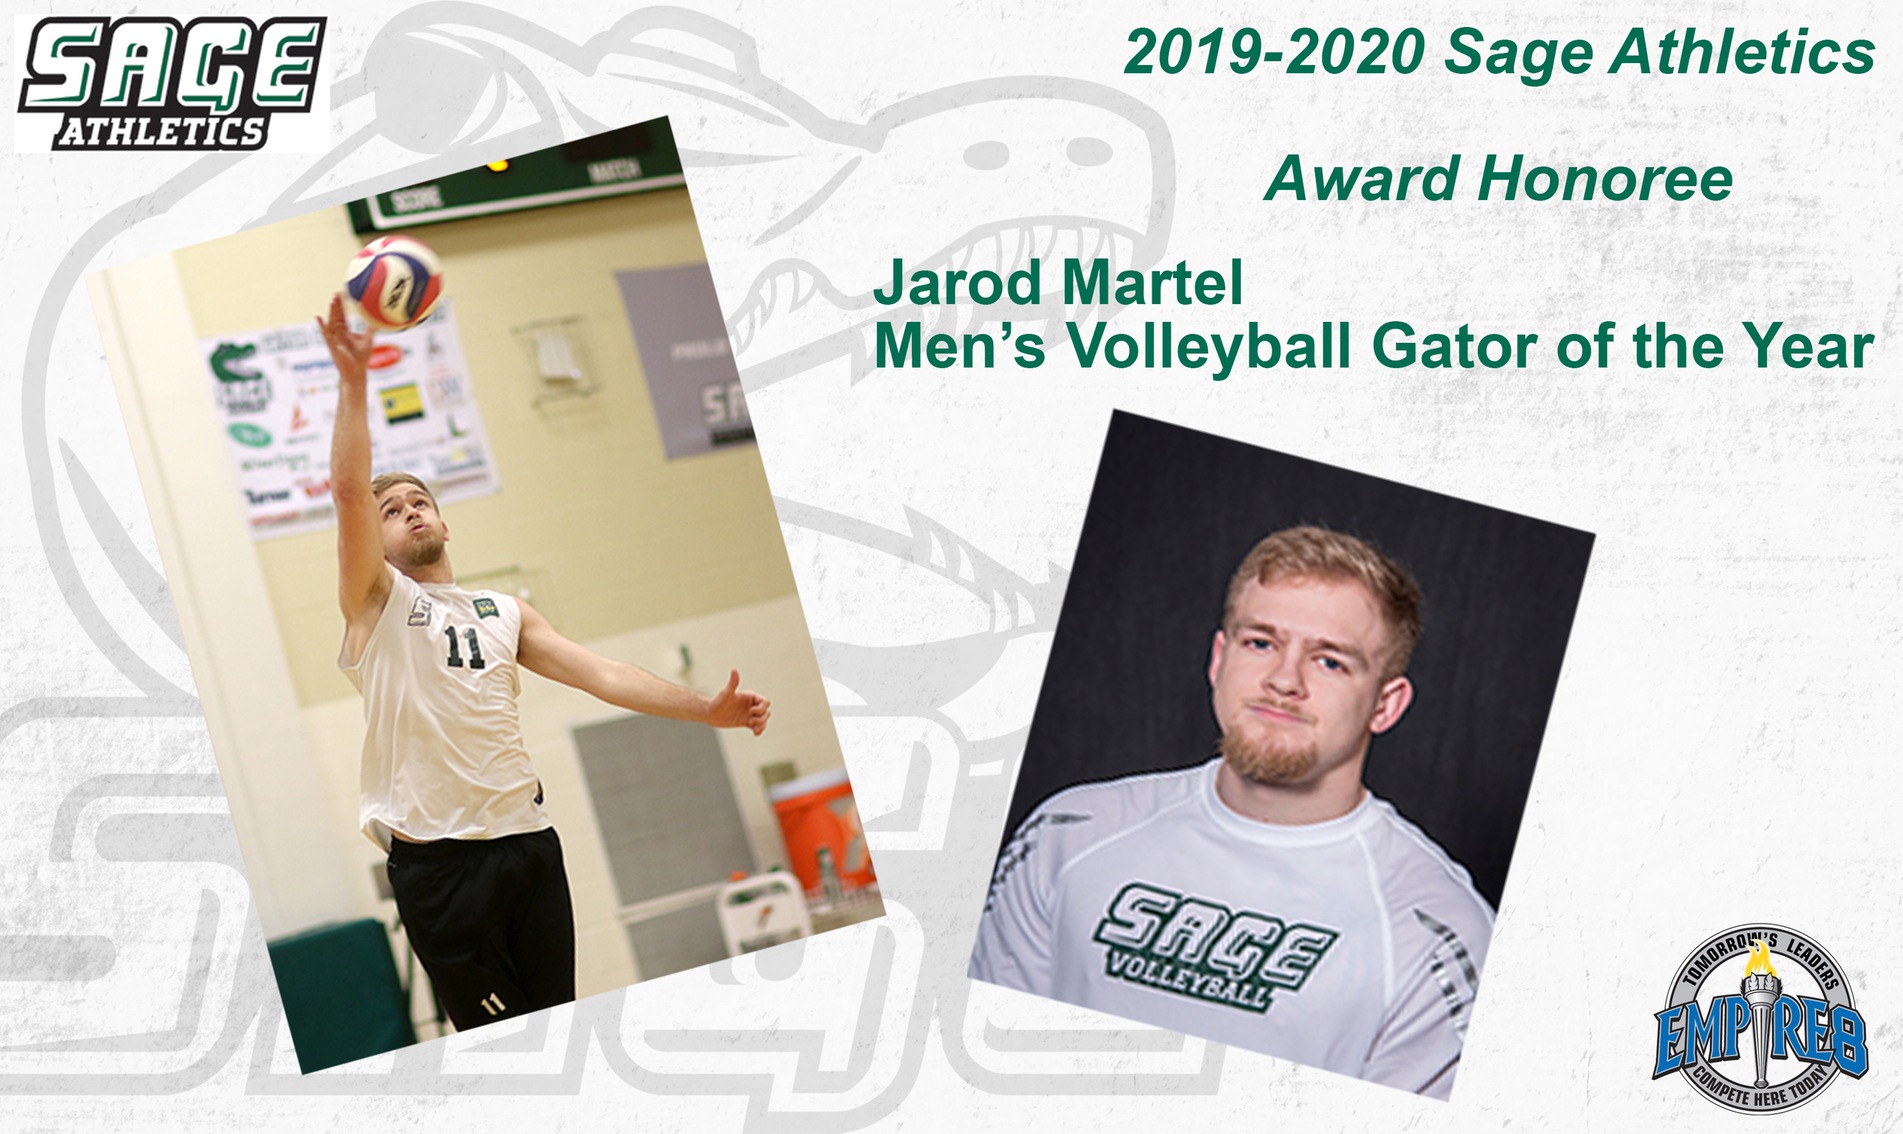 Jarod Martel named Men's Volleyball Gator of the Year